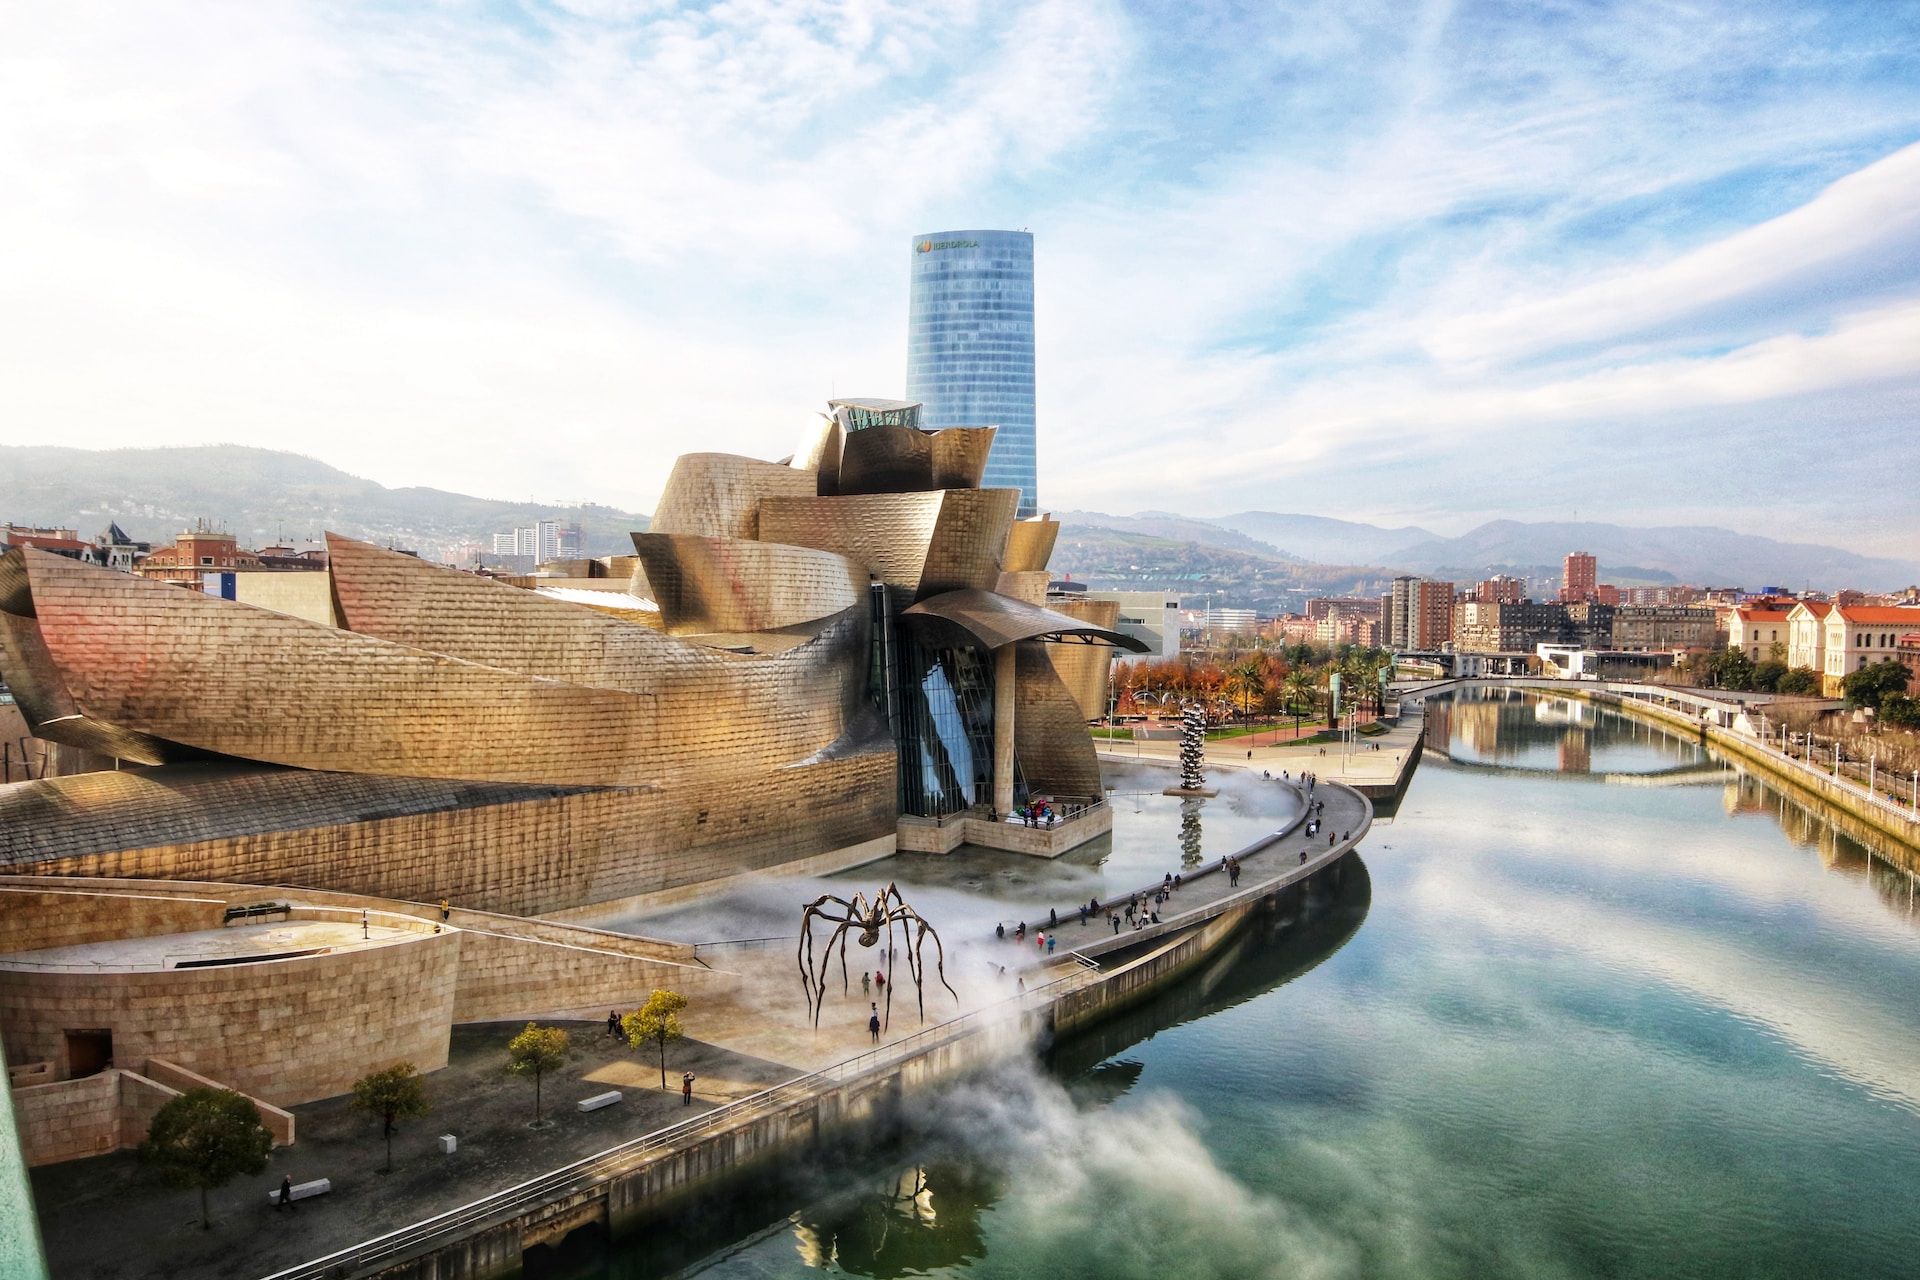 Bilbao or San Sebastian: Which One To Choose For A Few Days?